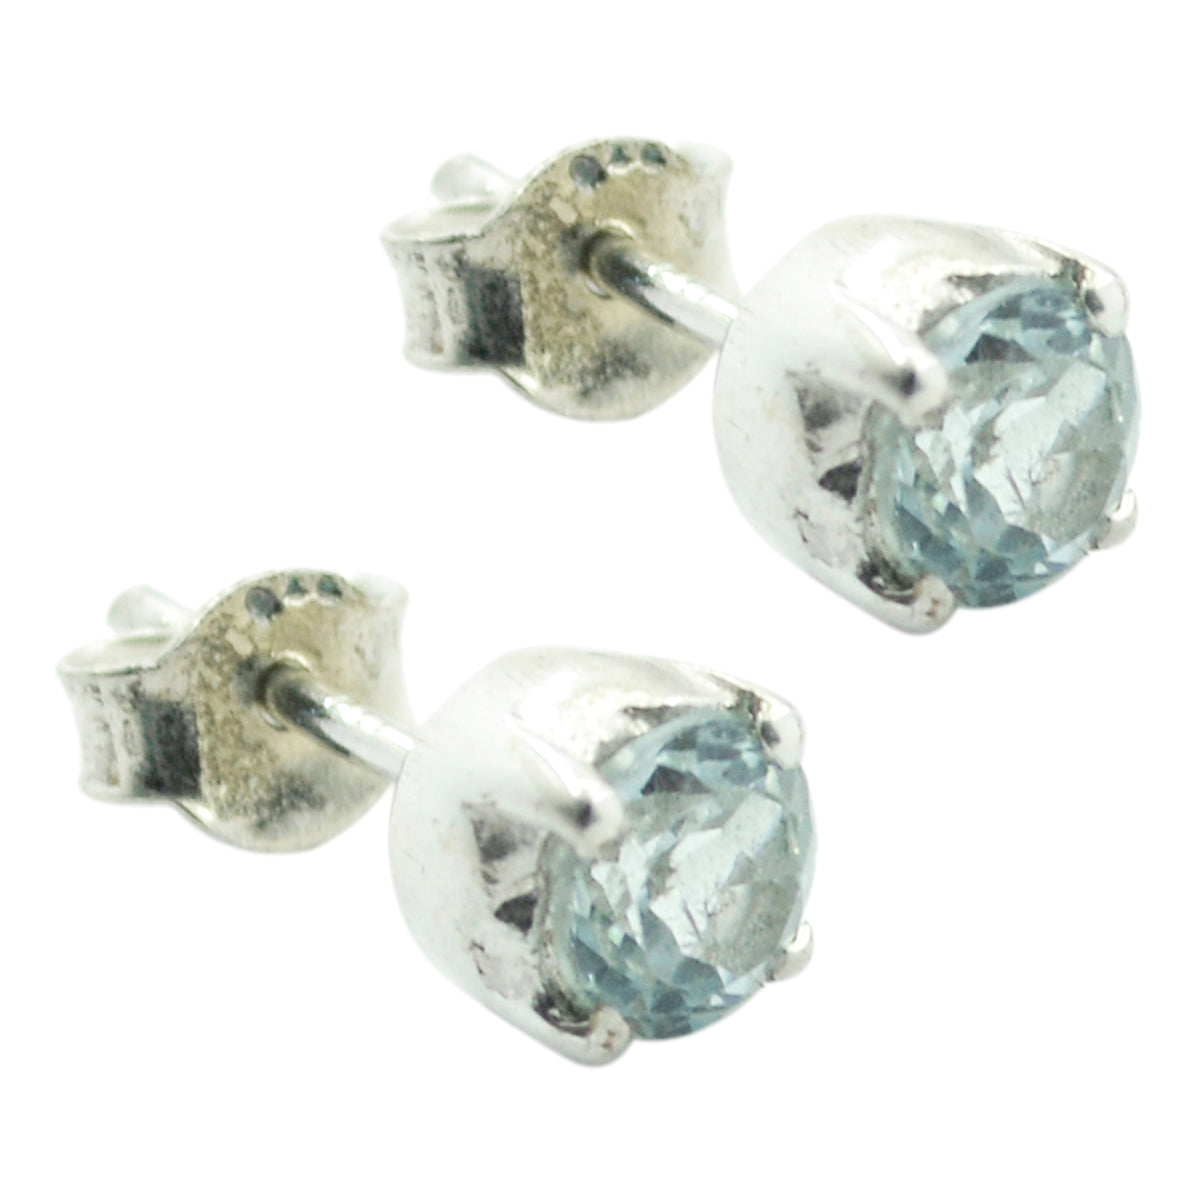 Riyo Nice Gemstone round Faceted Blue Topaz Silver Earrings gift for b' day